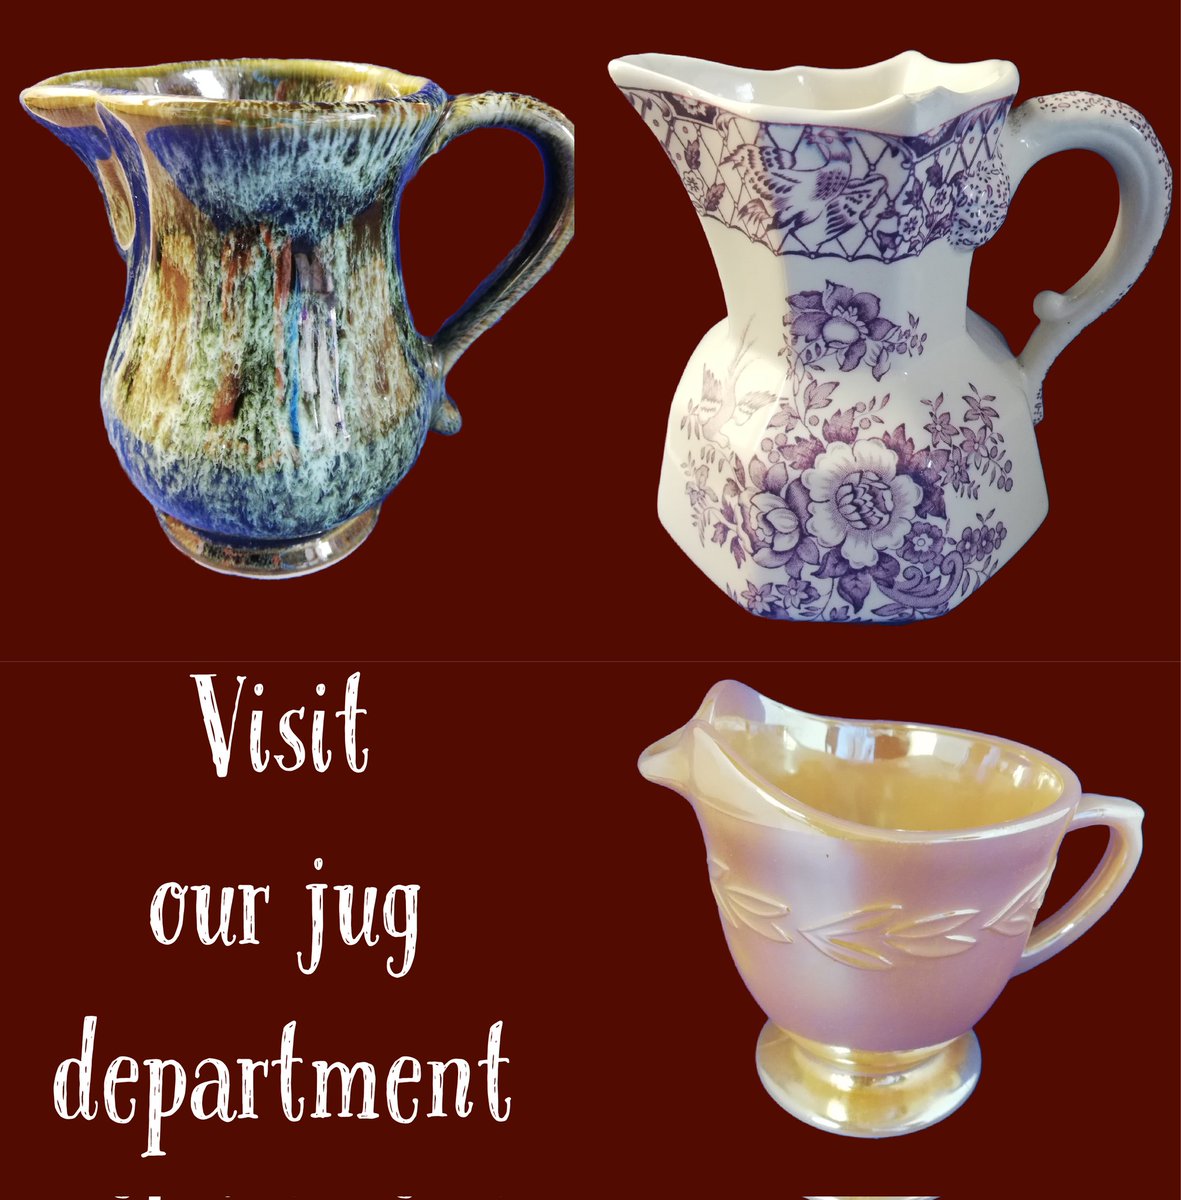 We stock a great selection of jugs for general use or just to show off. #vintage #milkjug #creamerjug #waterjug #perioddrama #vintagefinds #vintagekitchen #giftideas #present #20thCentury #shopify #shopvintage @shopify